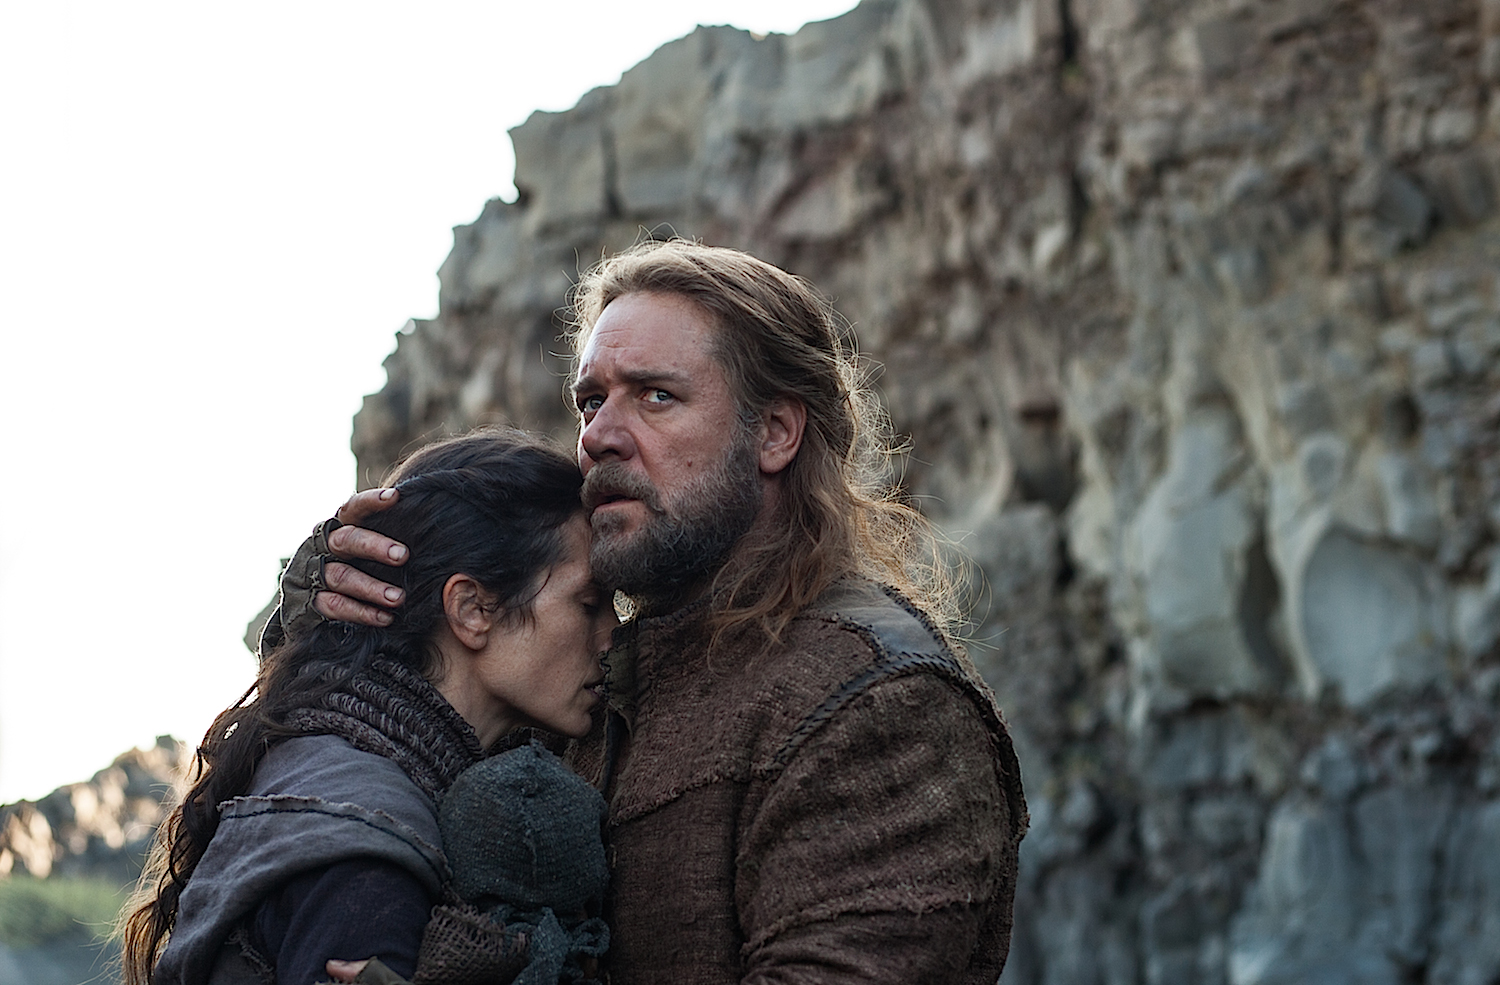 Noah, Movie releases March